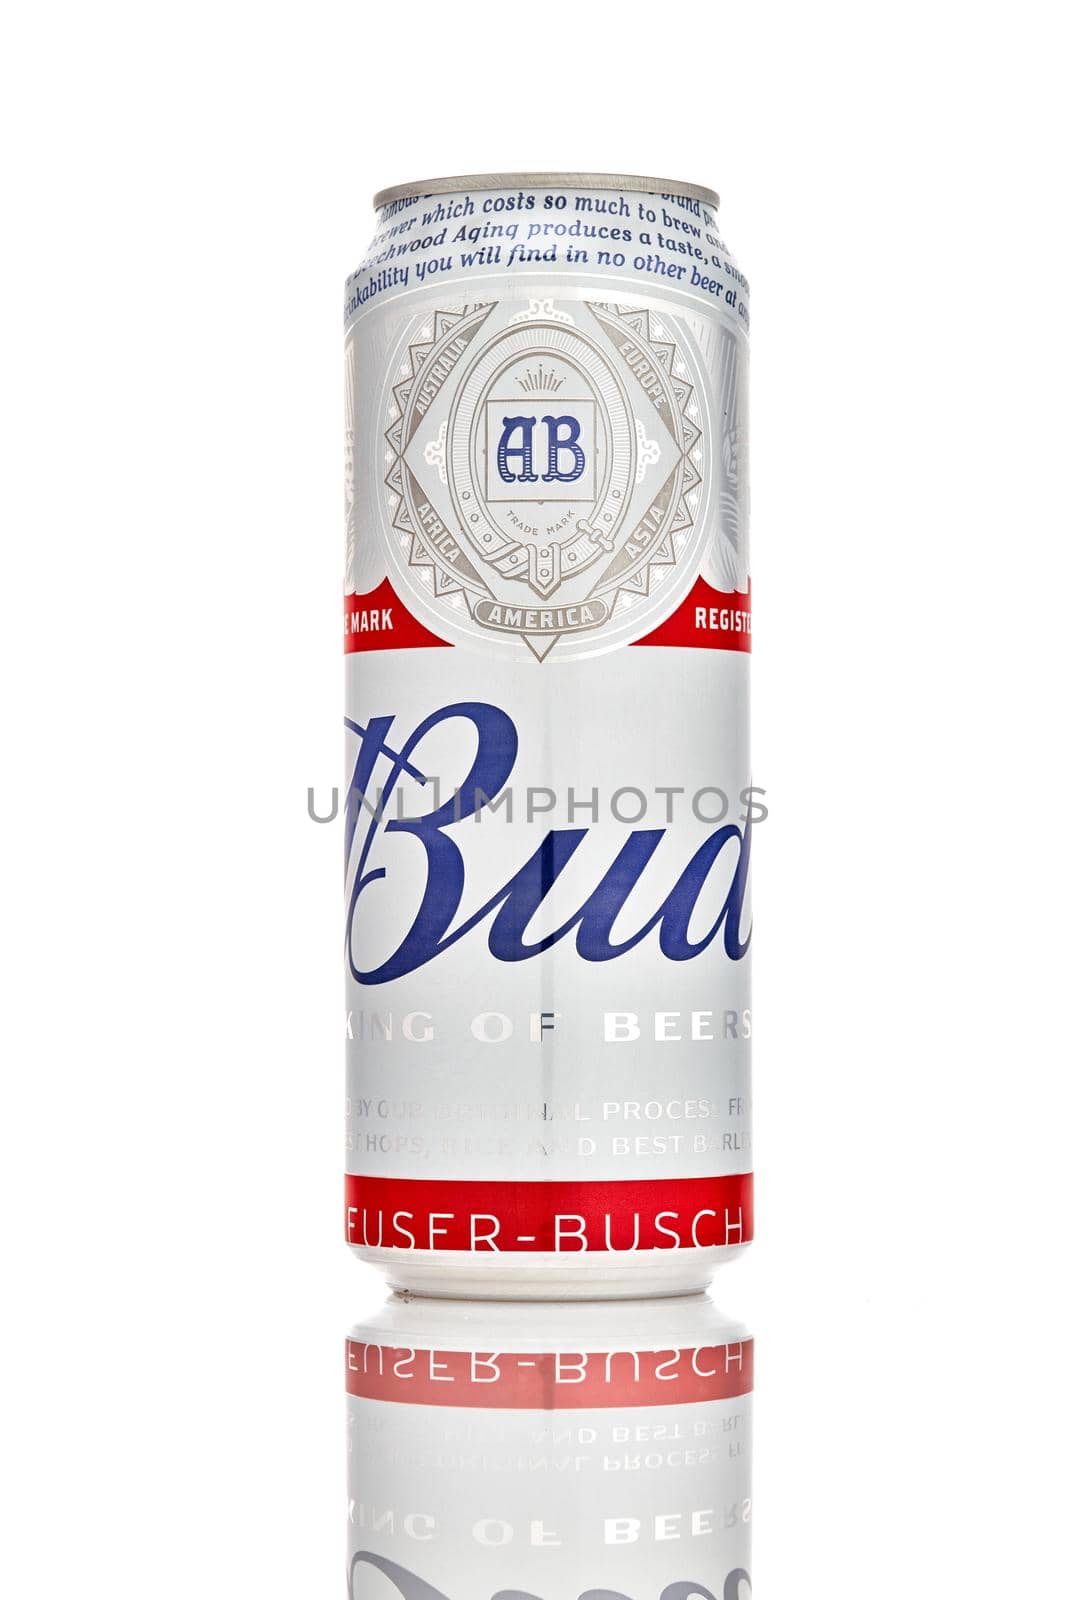 Beer Bud light, metal can, on a white background. Popular American Beer in a convenient package. King of beer. 21.06.2019, Rostov-on-Don, Russia.